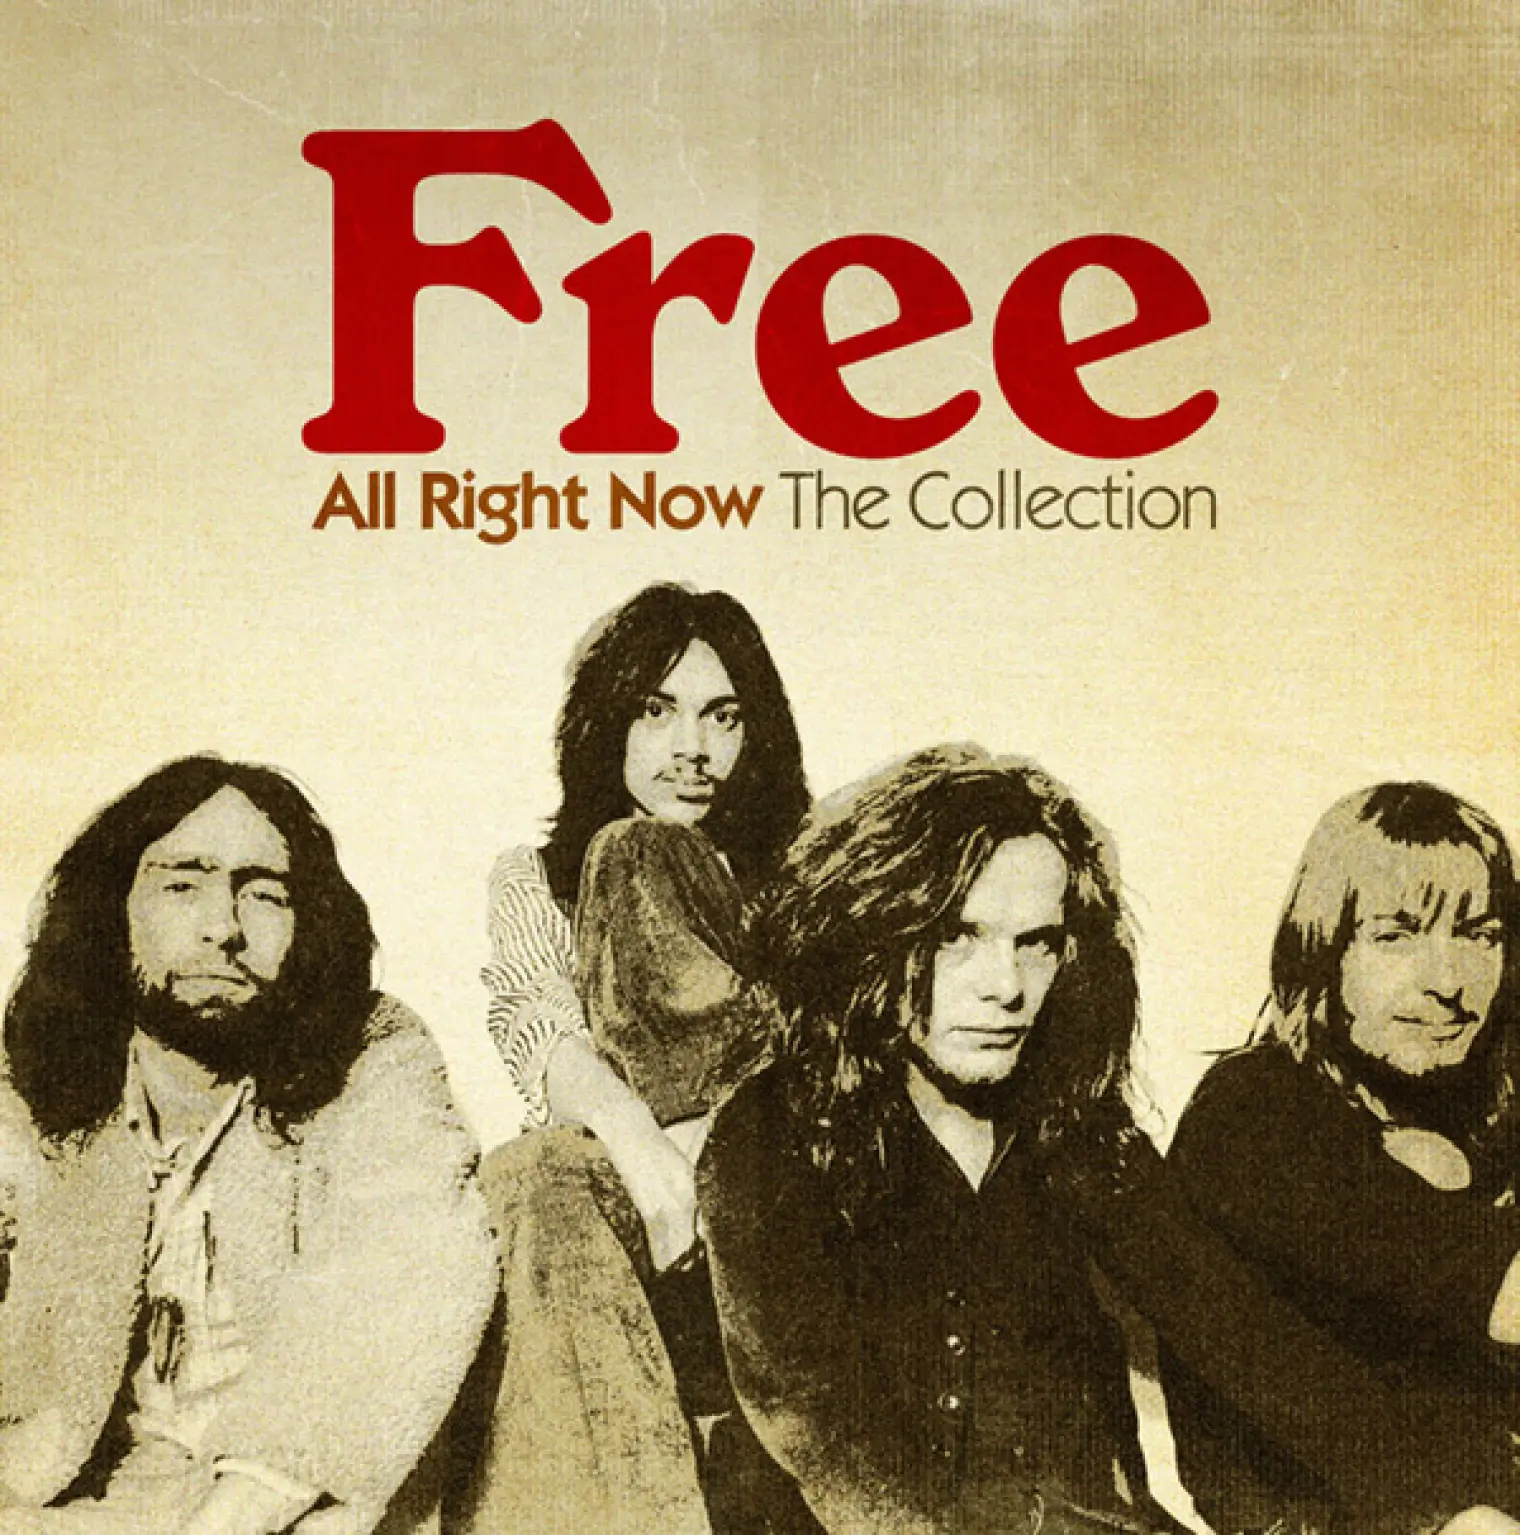 All Right Now: The Collection -  Free 